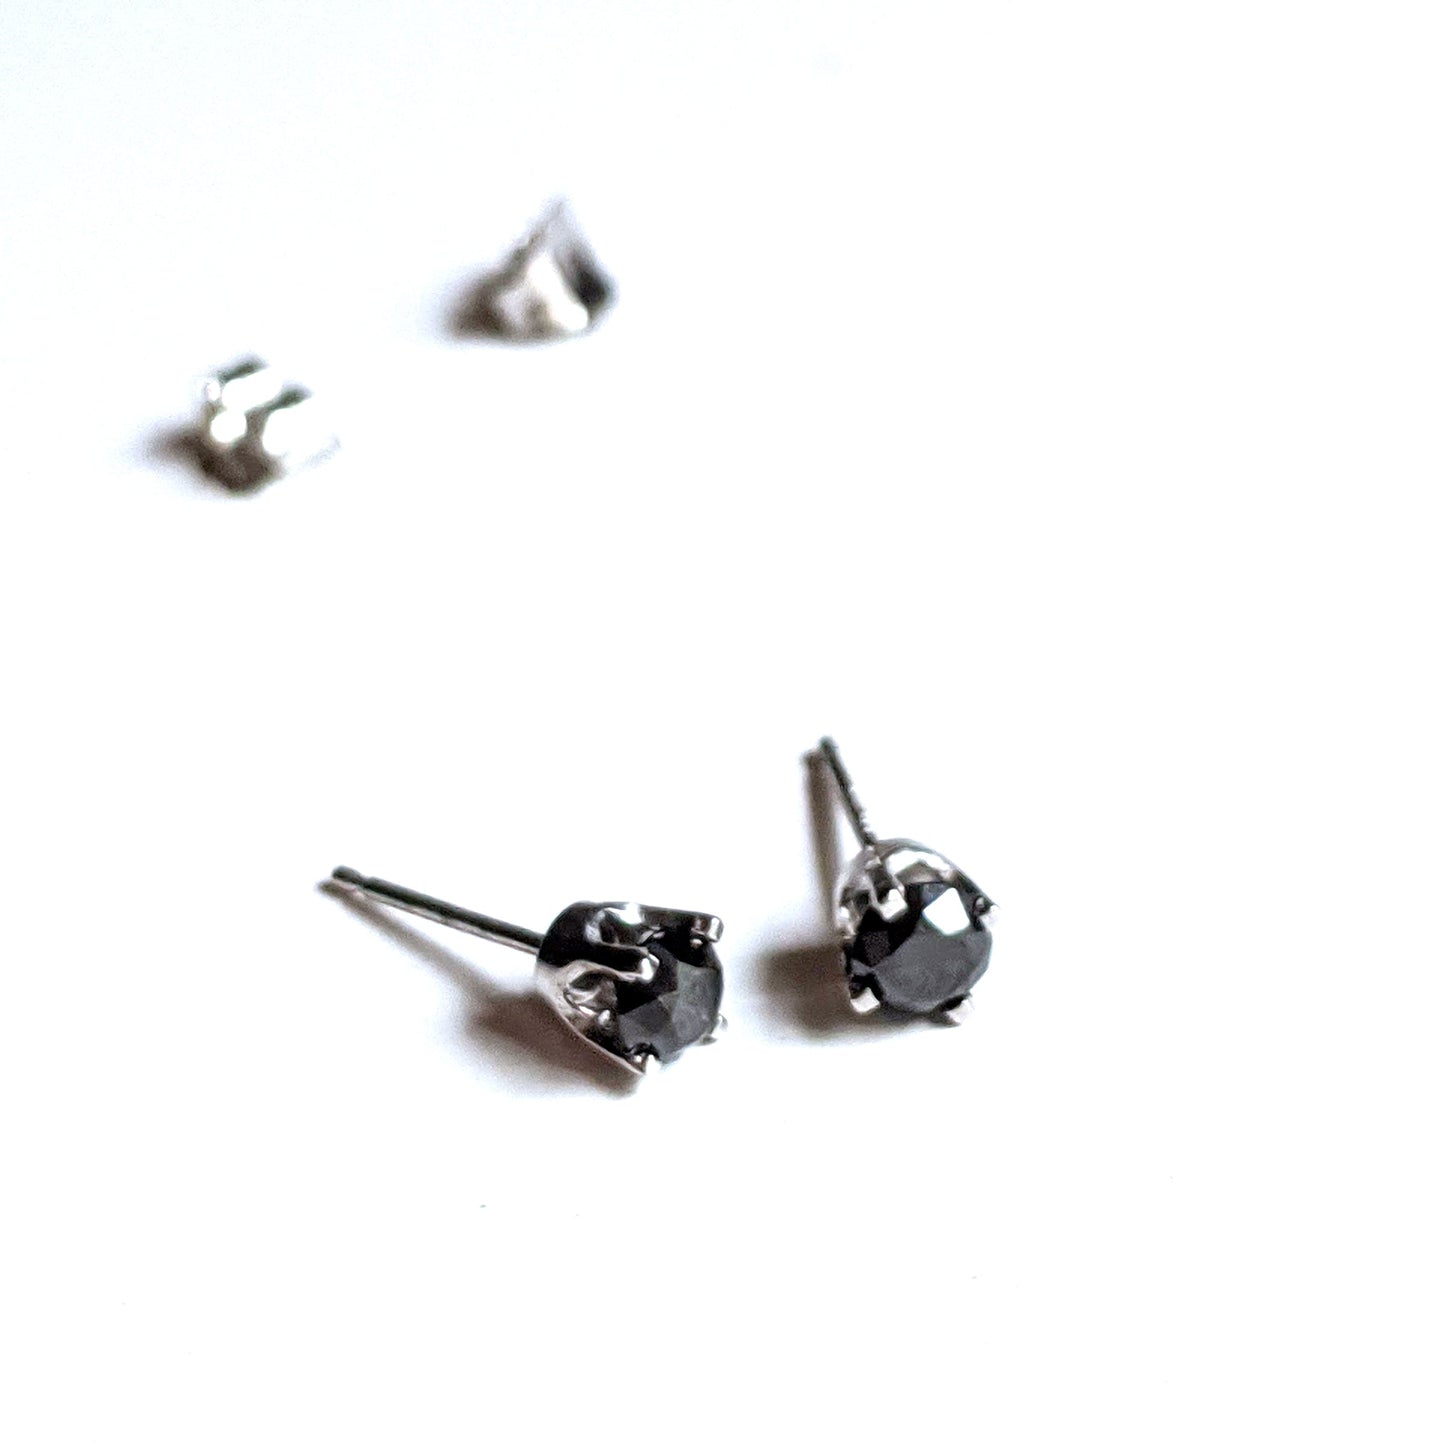 Full view of top and side of Black Diamond Stud Earrings. There studs are made of white gold and have set black diamonds.